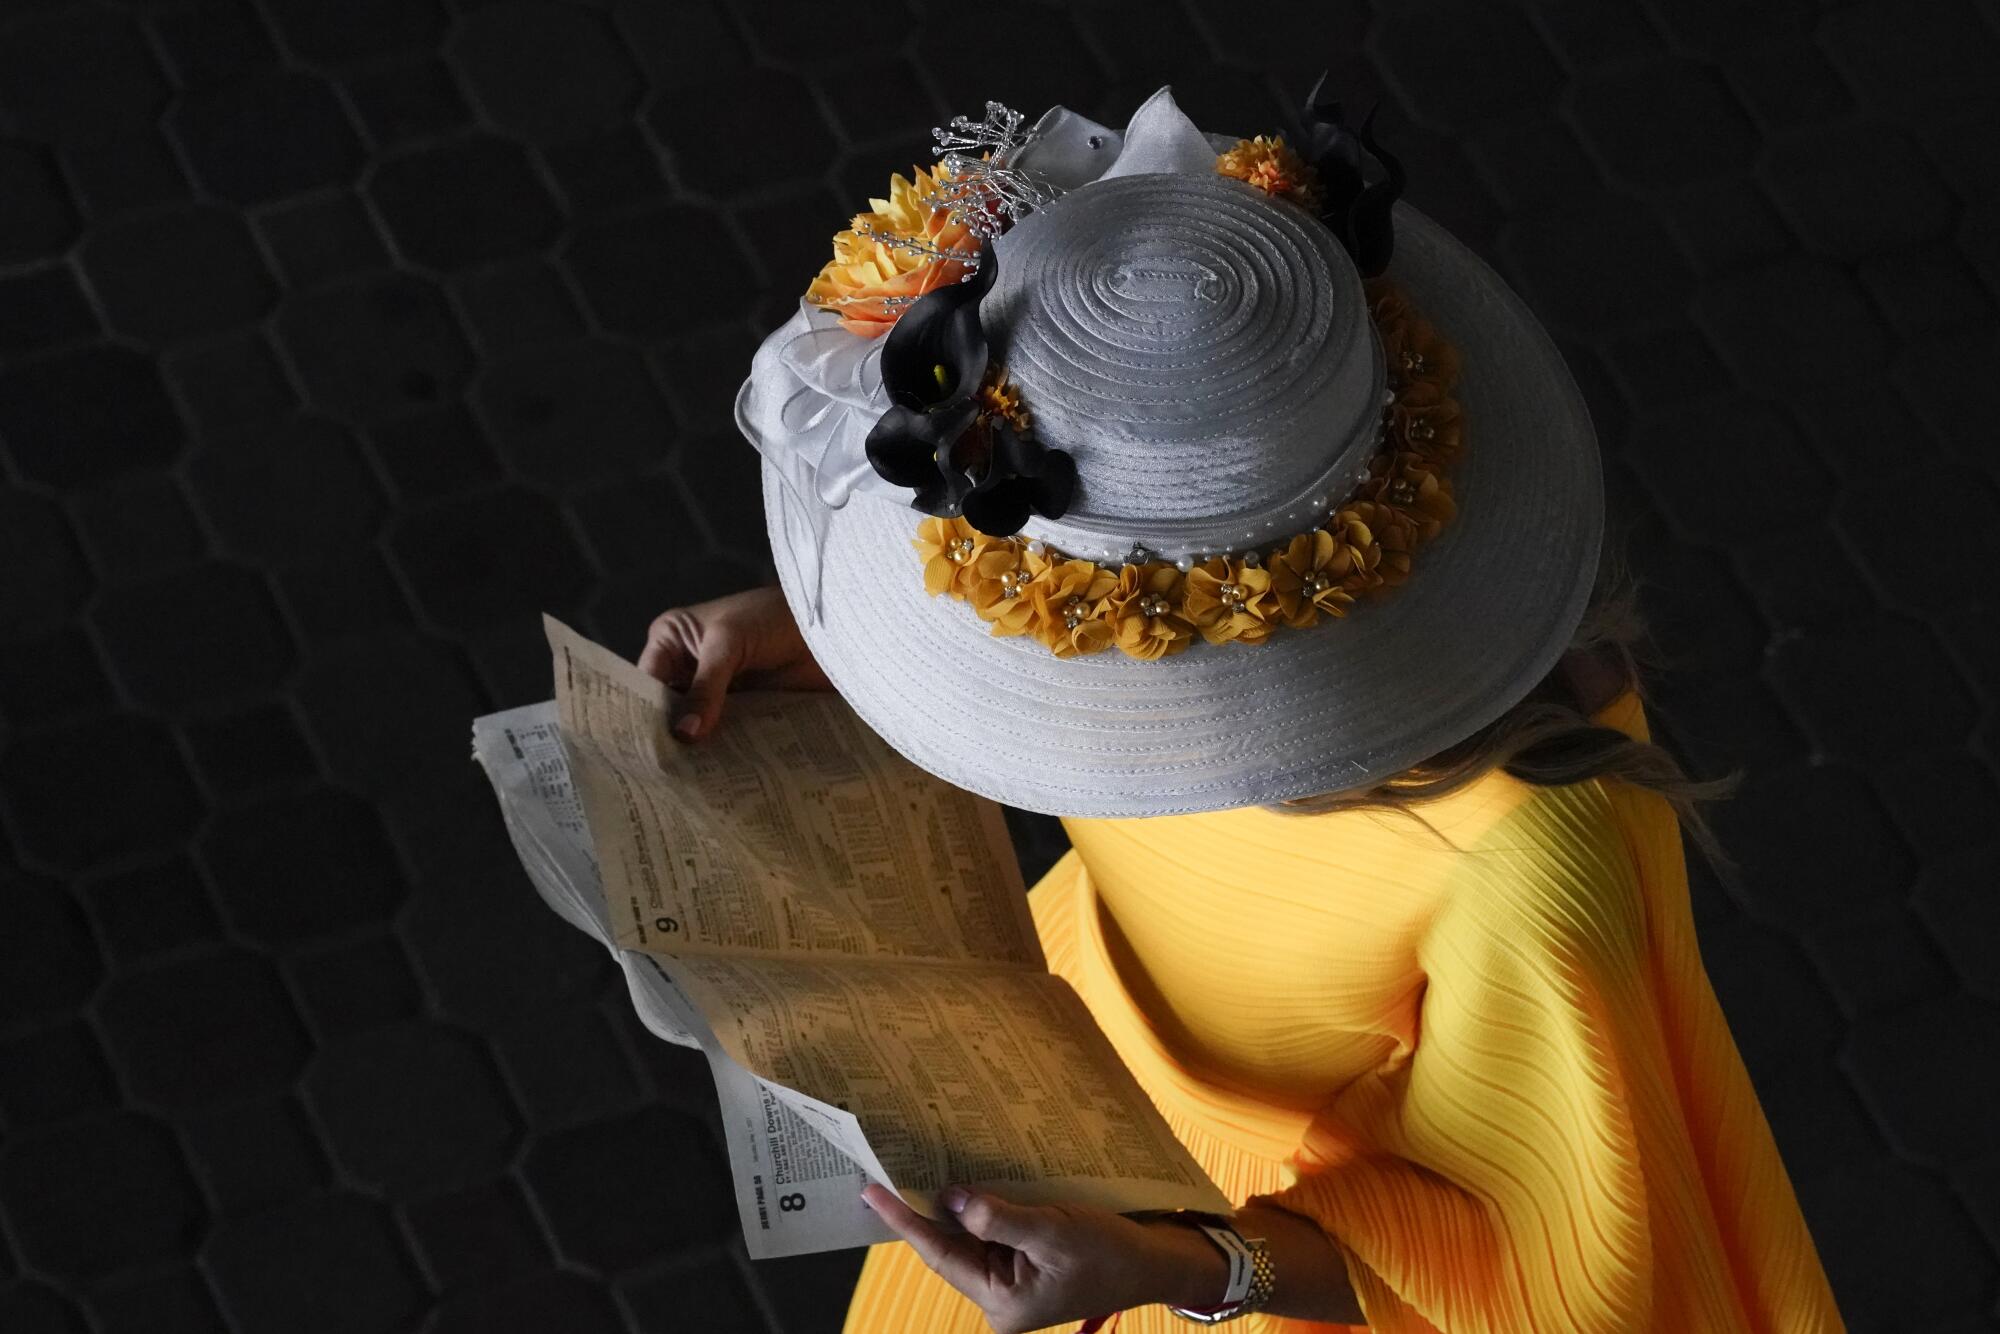 A woman wears a gray brimmed hat with yellow flowers around the brim and a yellow dress.